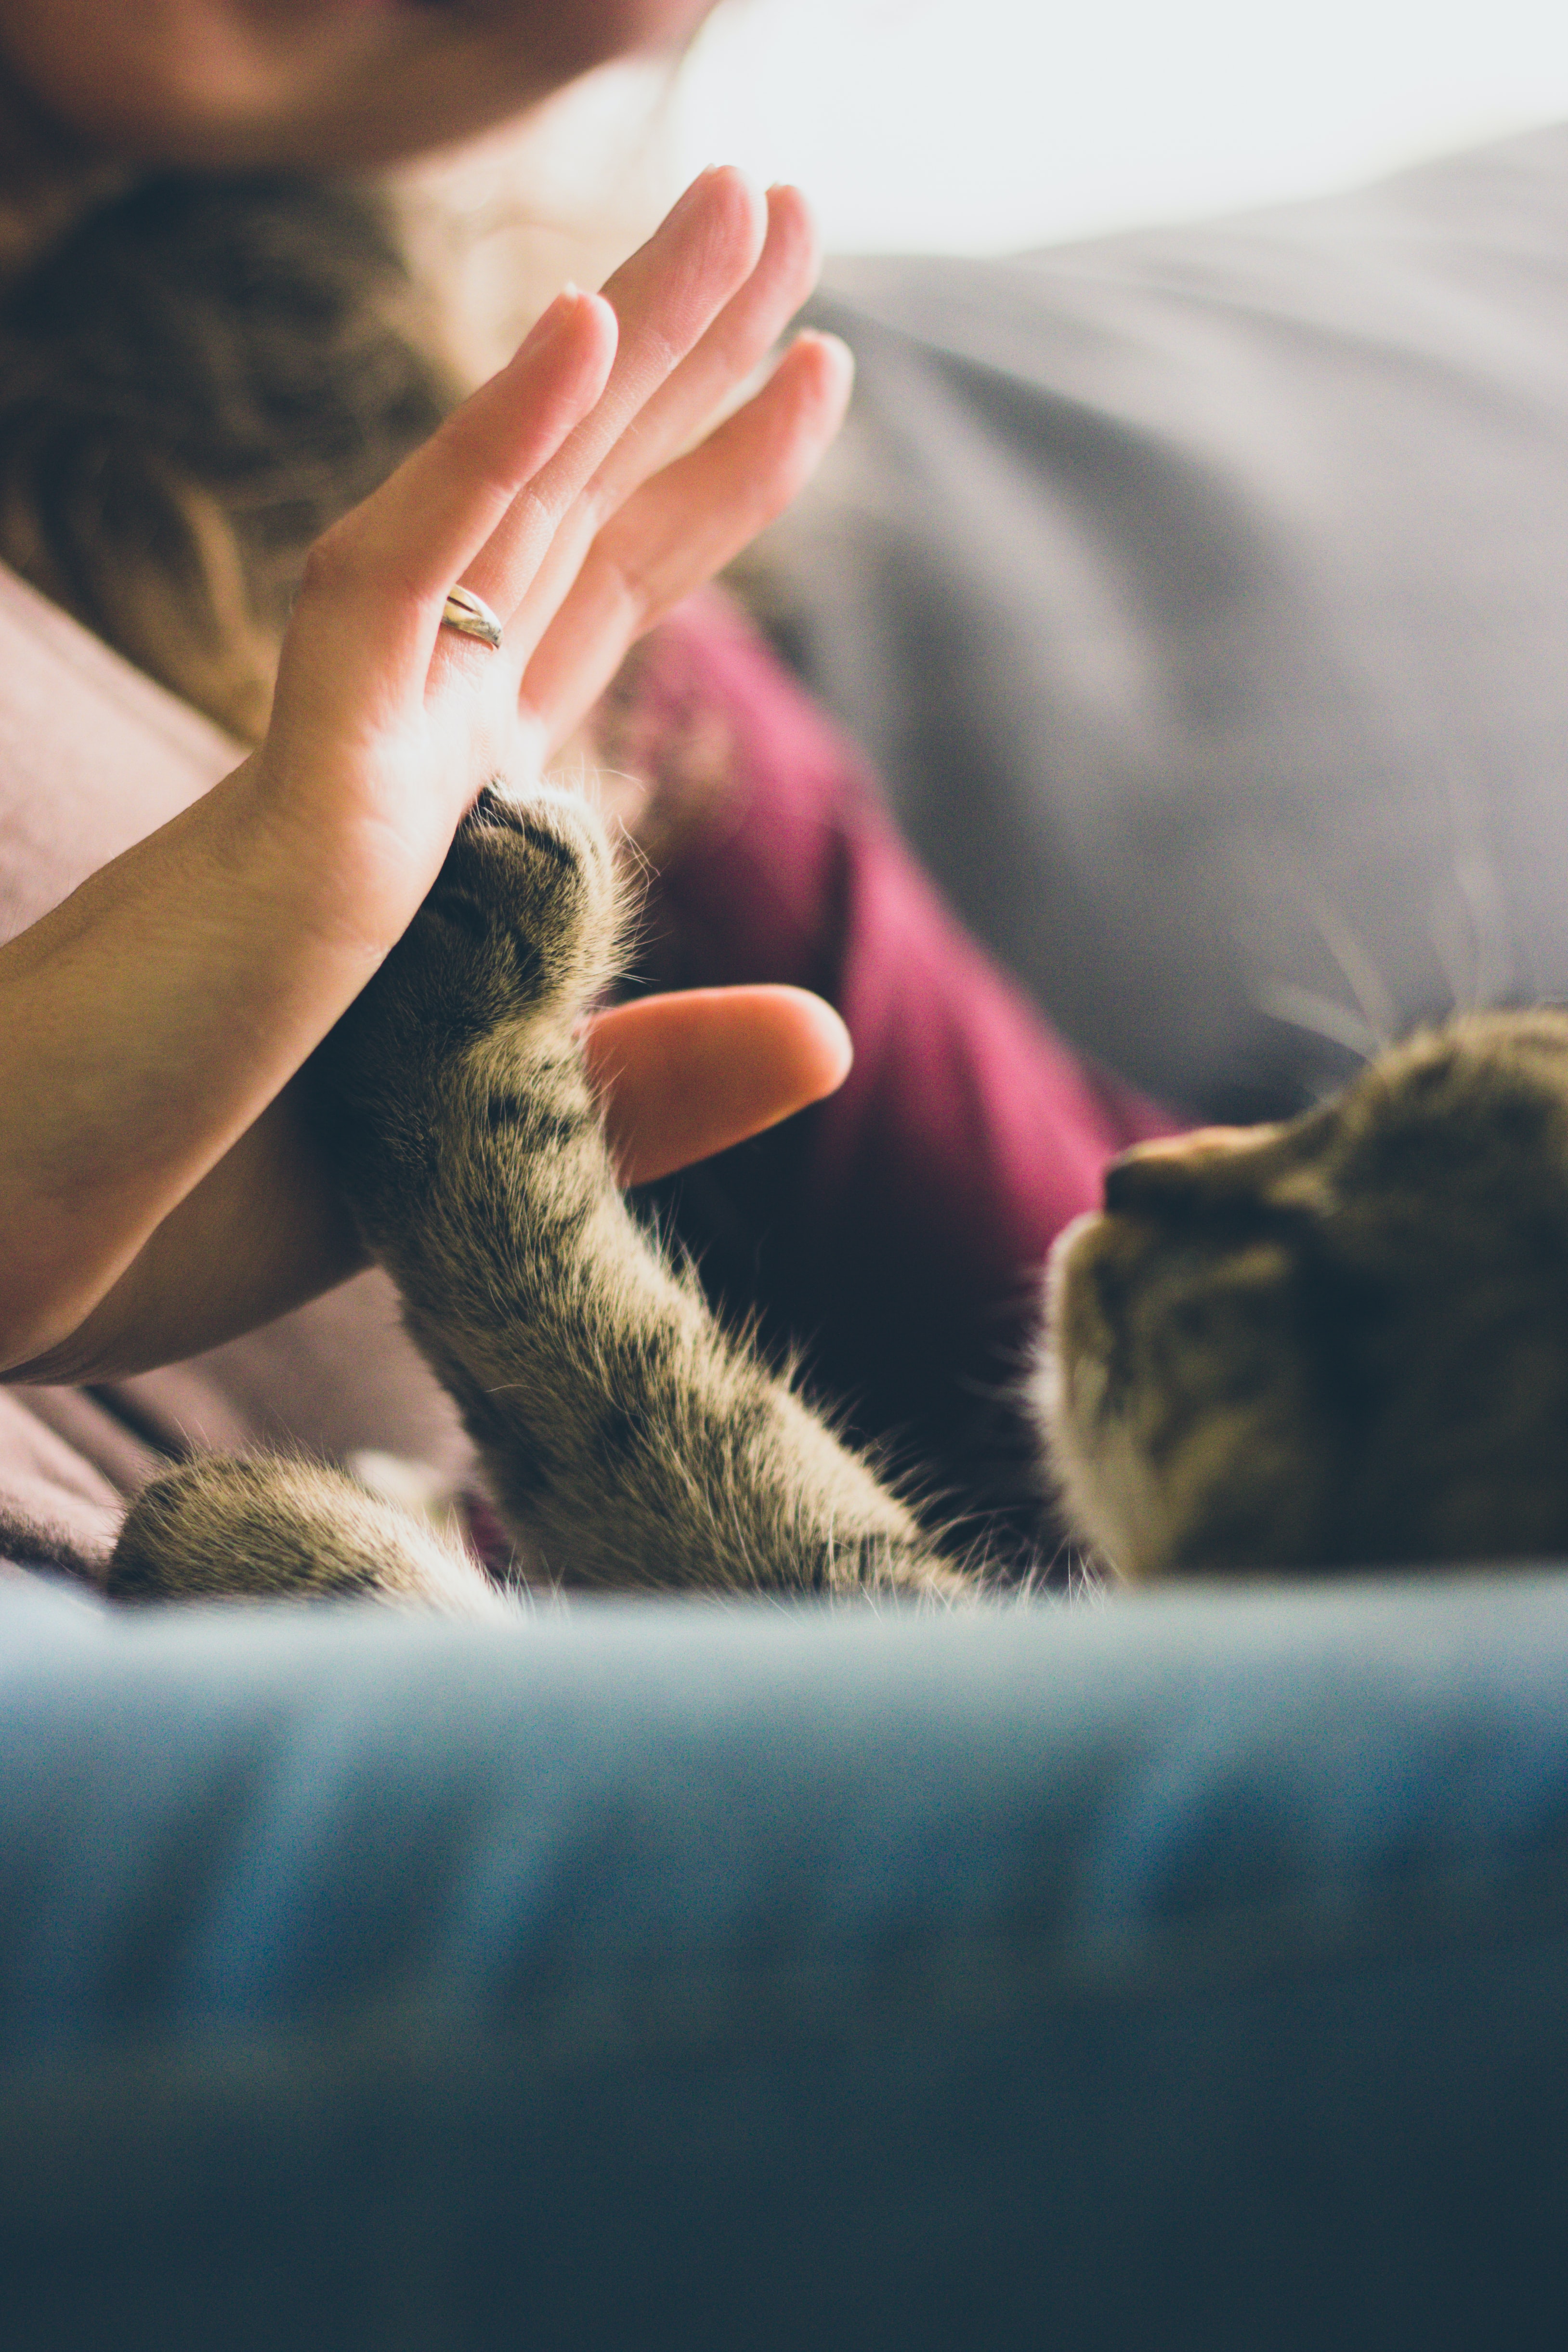 cat high five with human hand